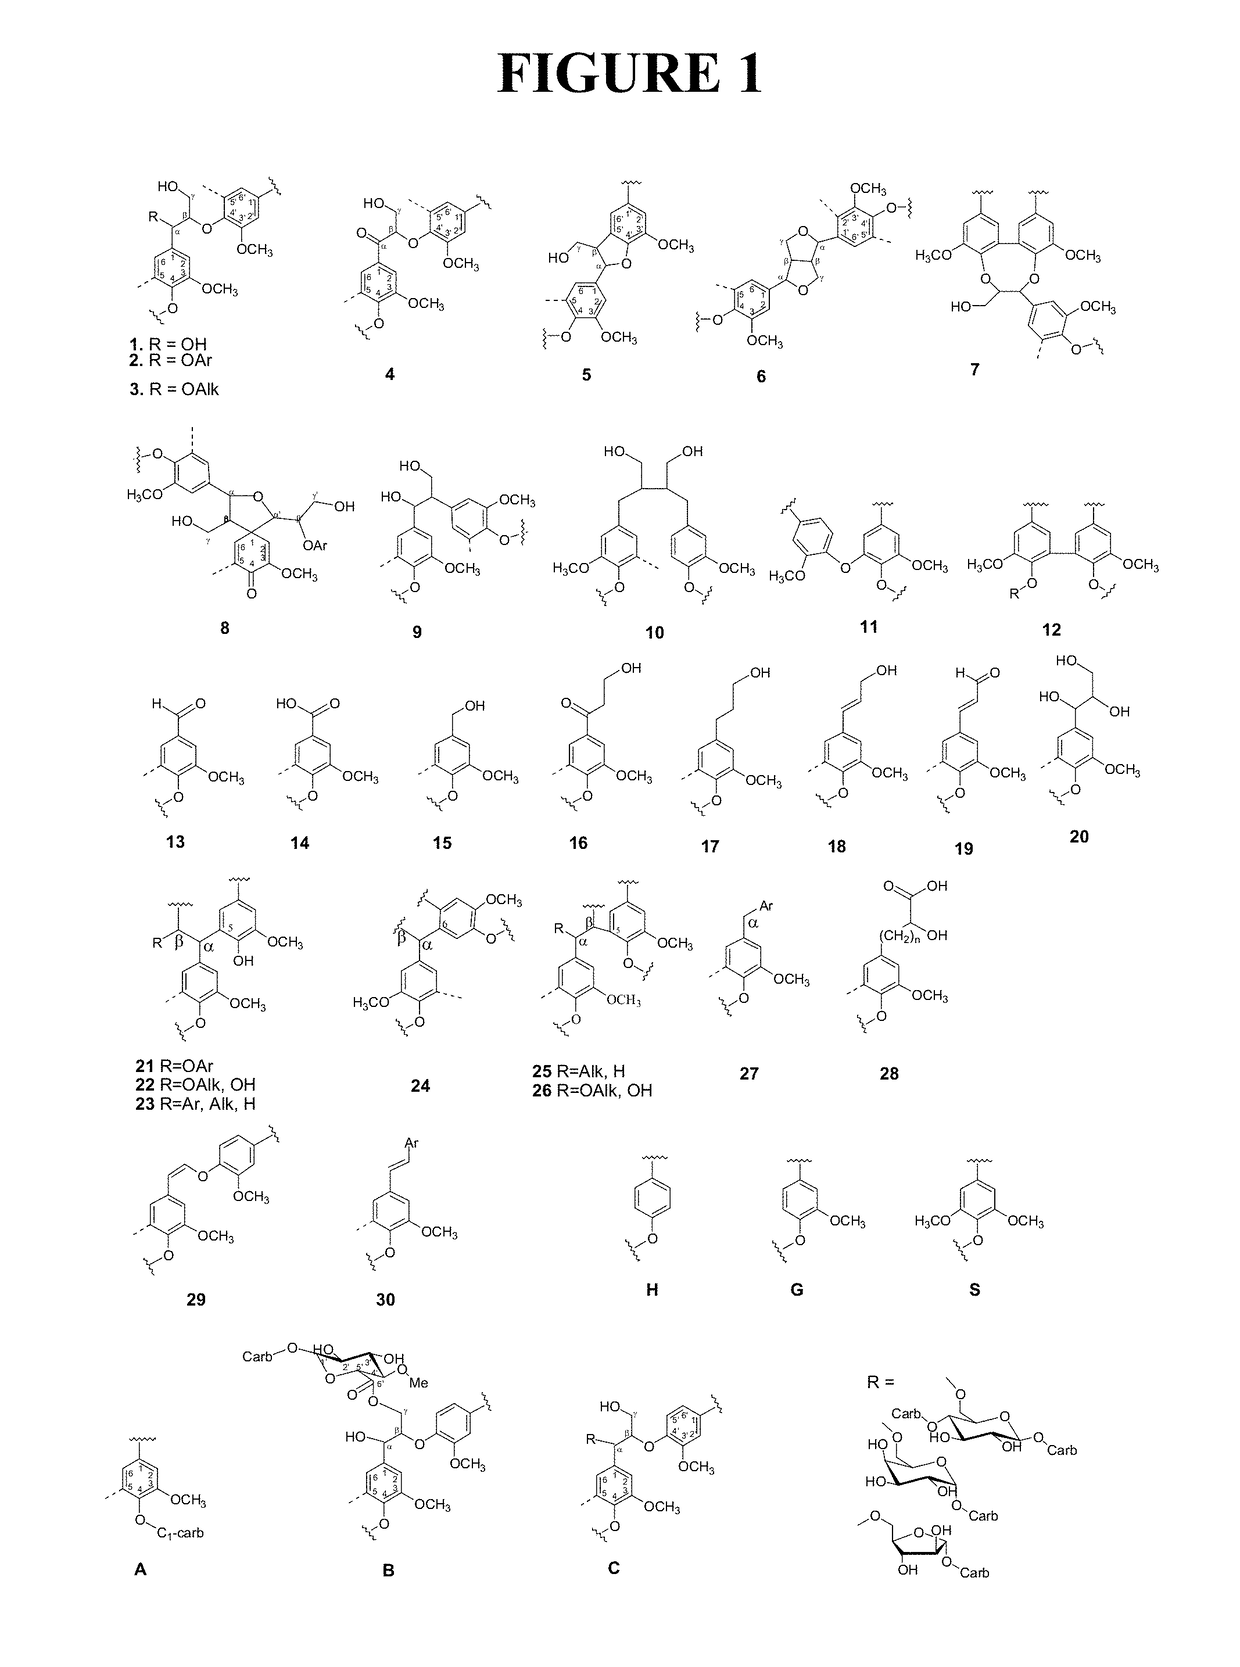 High purity lignin, lignin compositions, and higher structured lignin